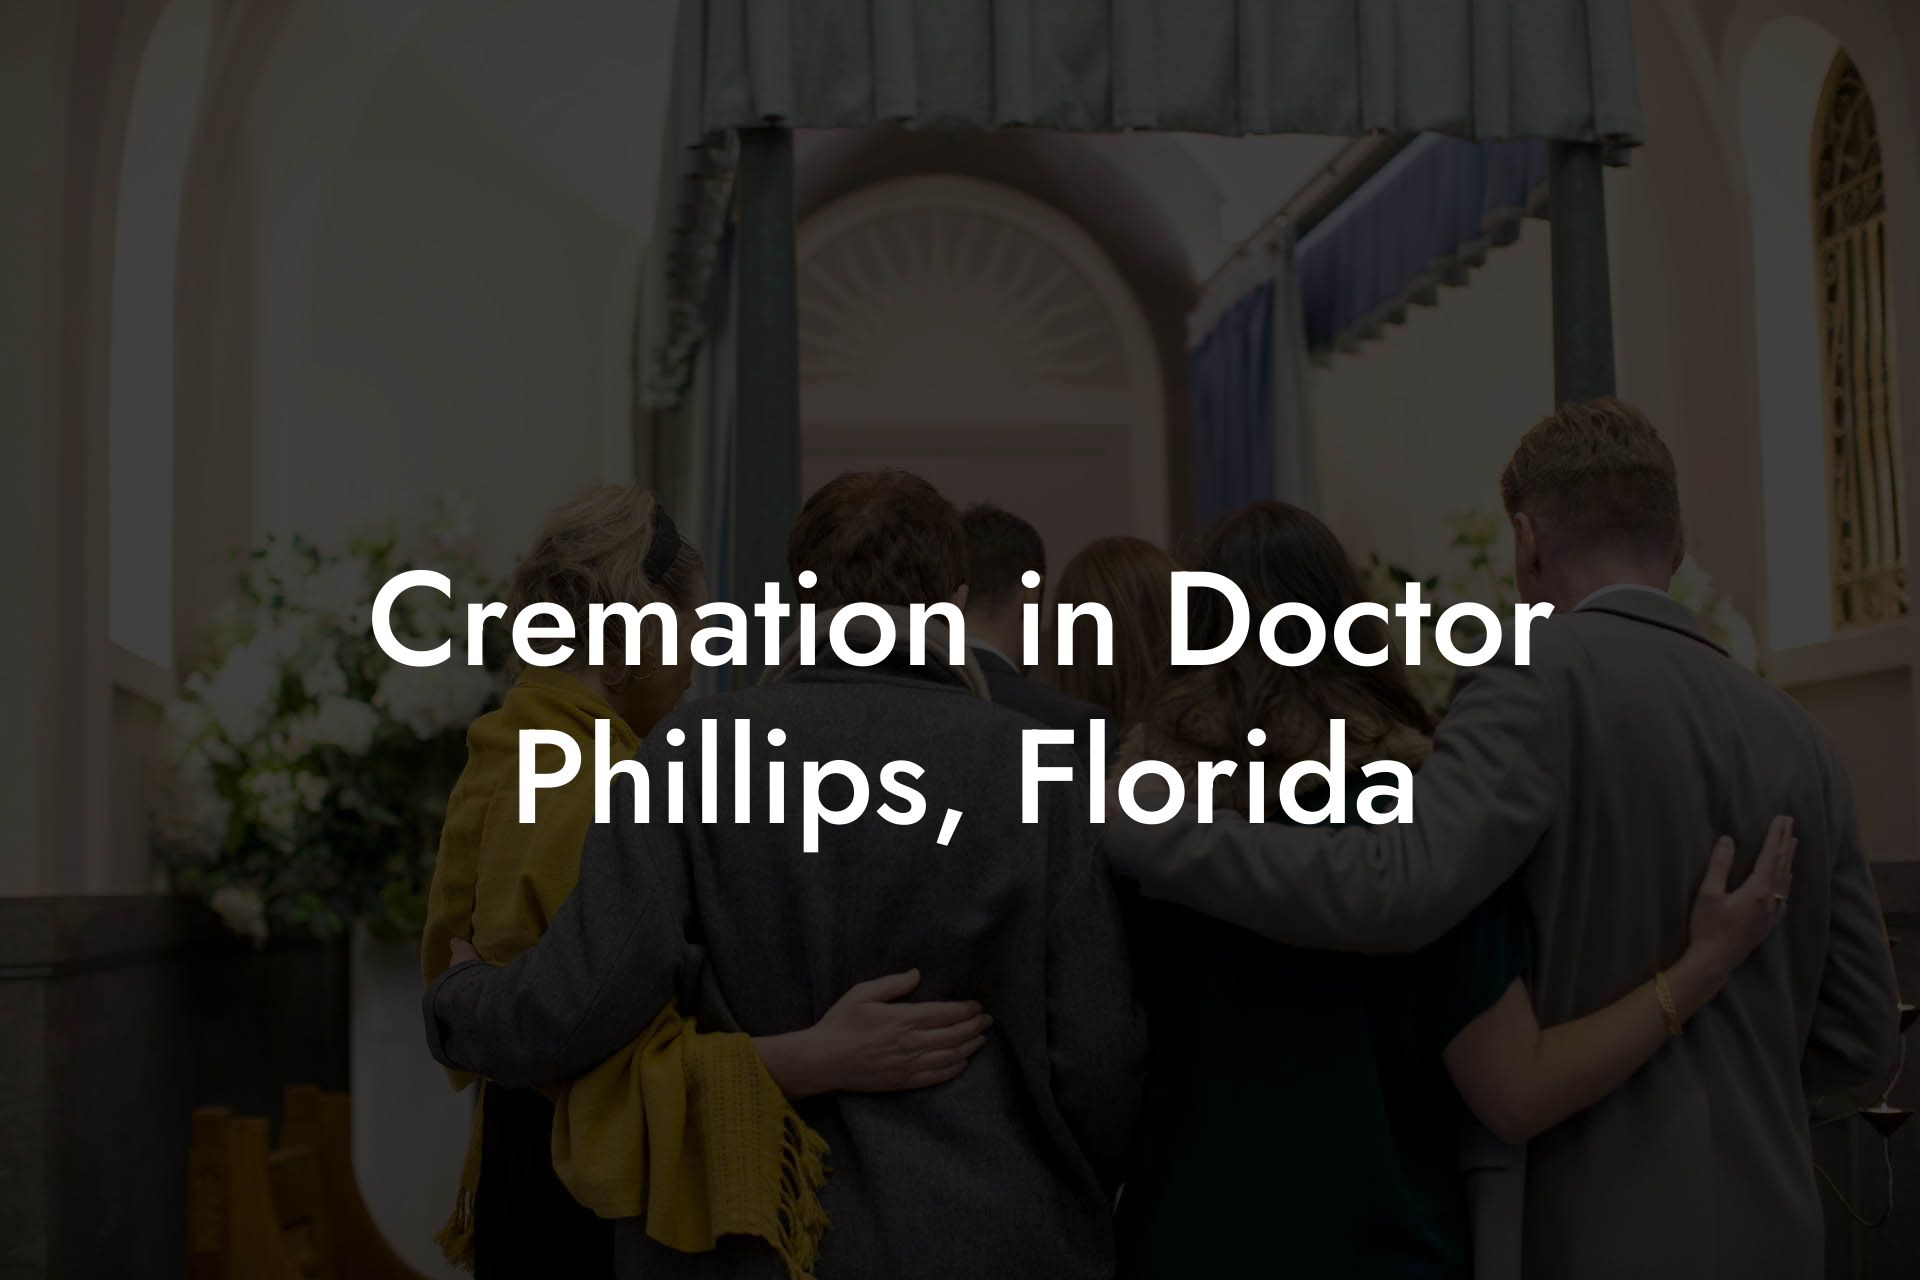 Cremation in Doctor Phillips, Florida